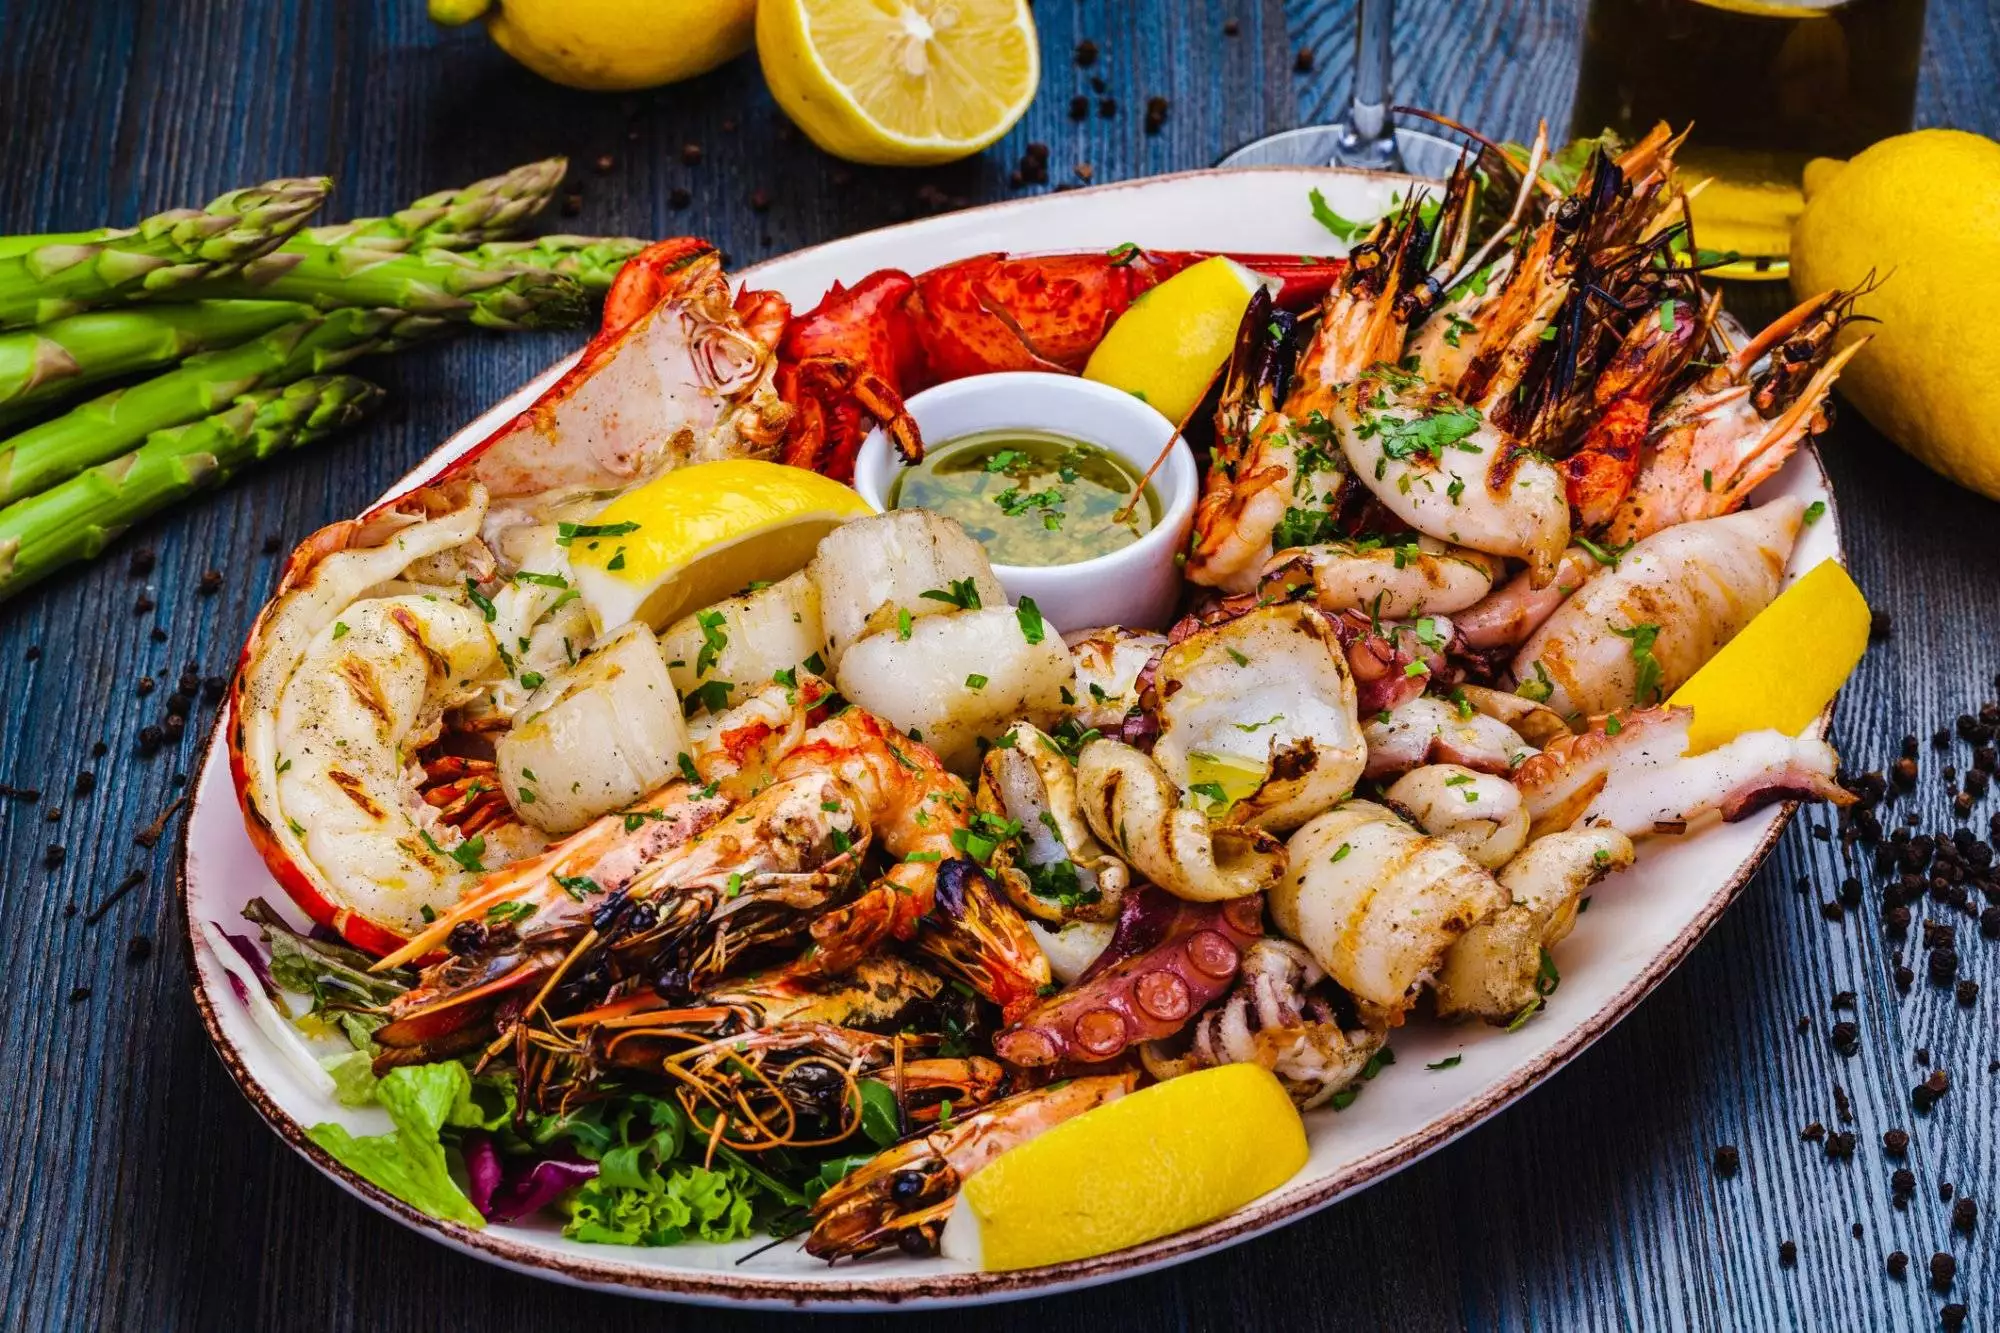 Indulge in Seafood Delights at the Richardson Big Shucks